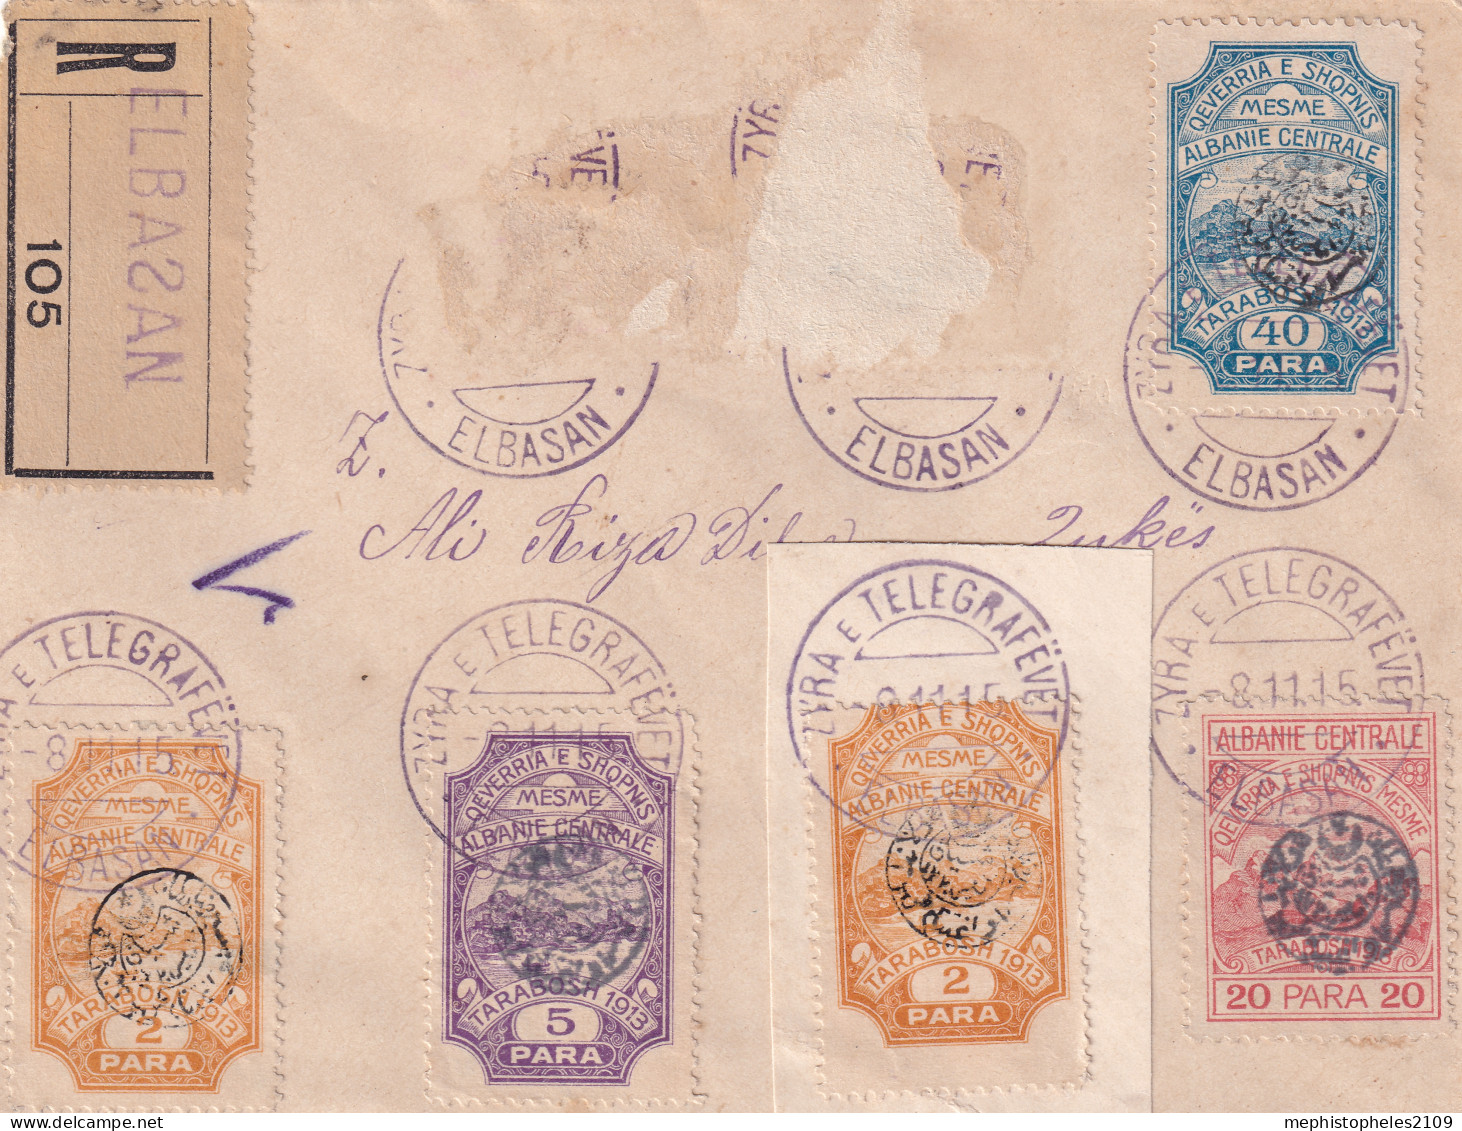 ALBANIA 1915 - ESSAD POST - Fragement Of Reco Cover From Elbasan To Qukes - 5 Stamps, 2 Missing - Albania